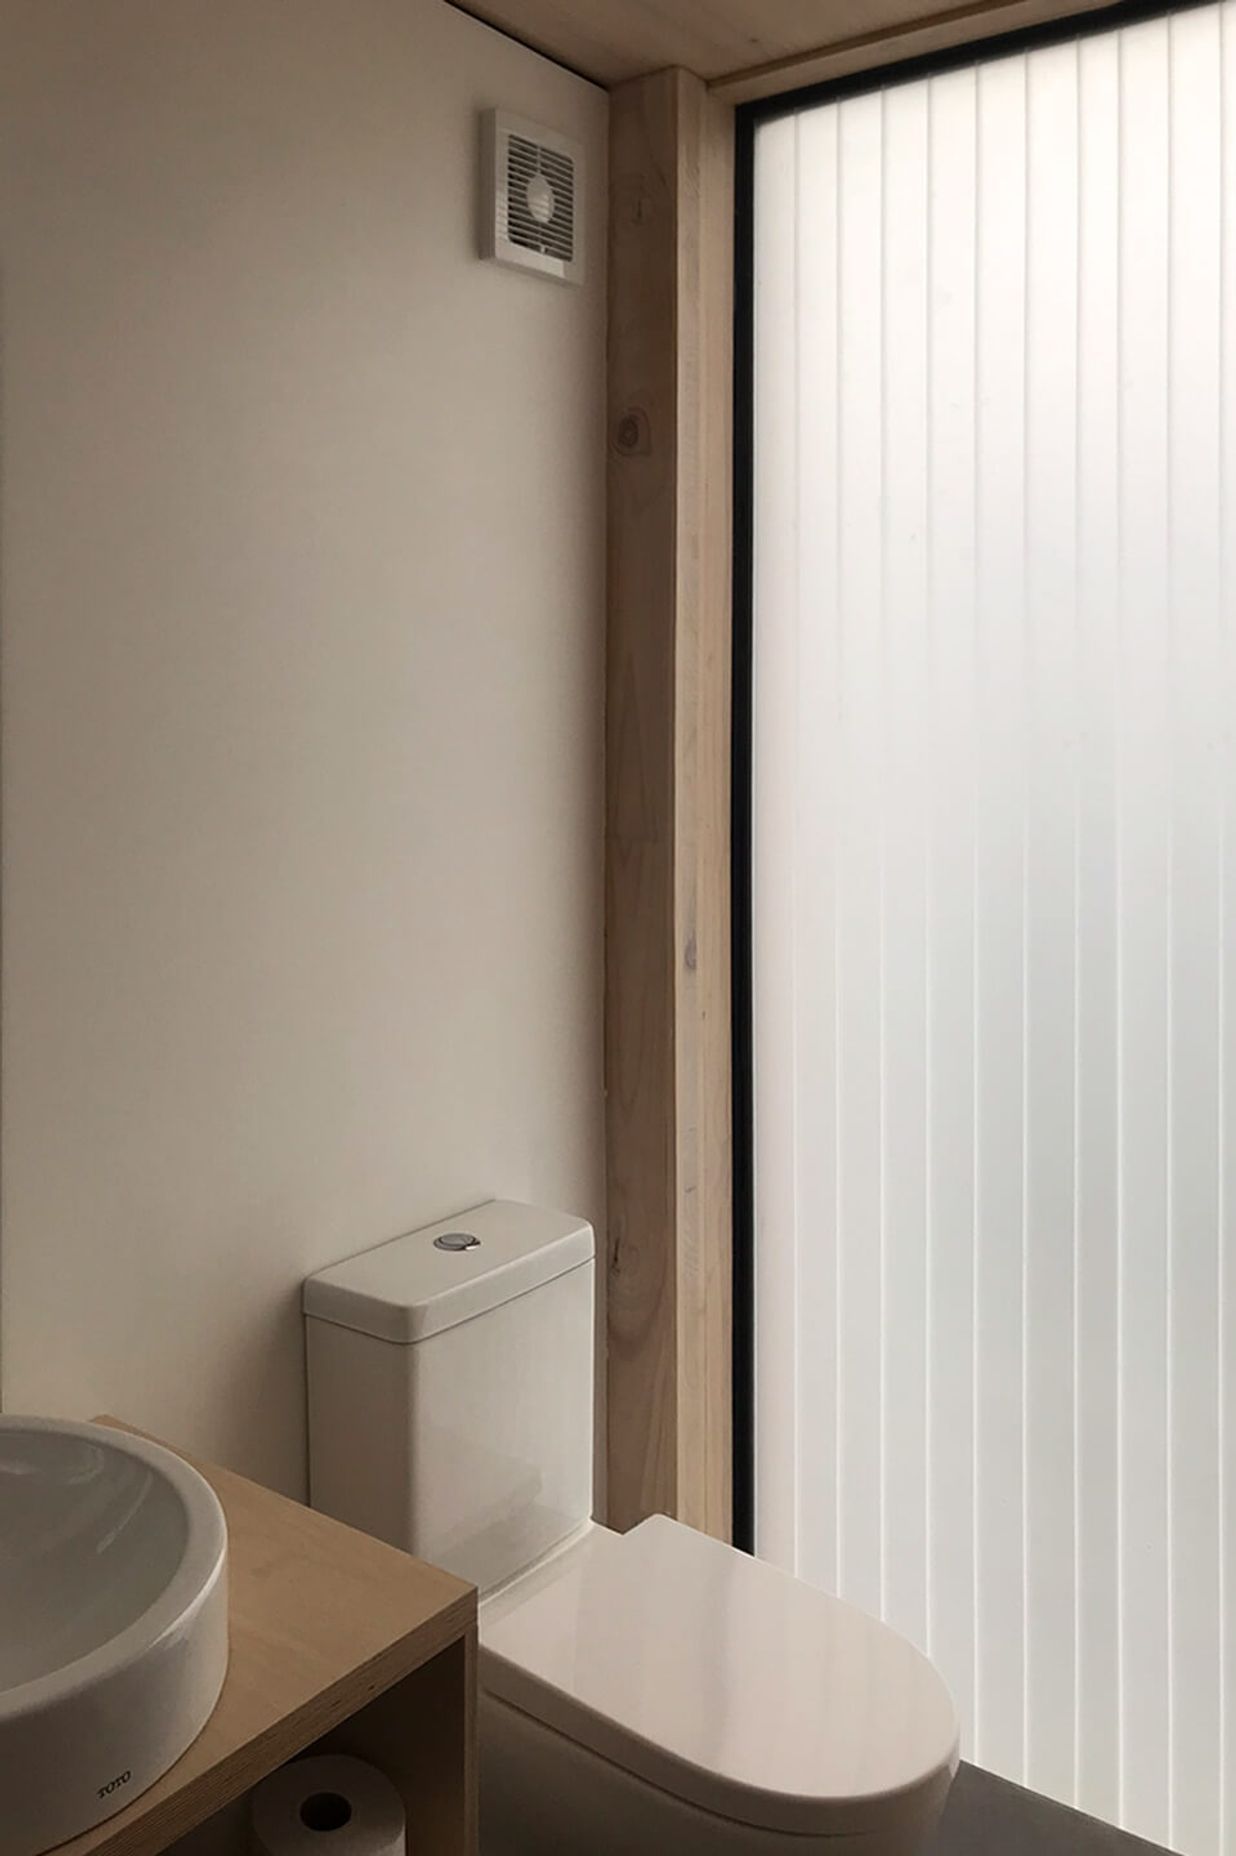 A polycarbonate slot in the wall fills the bathroom with light.